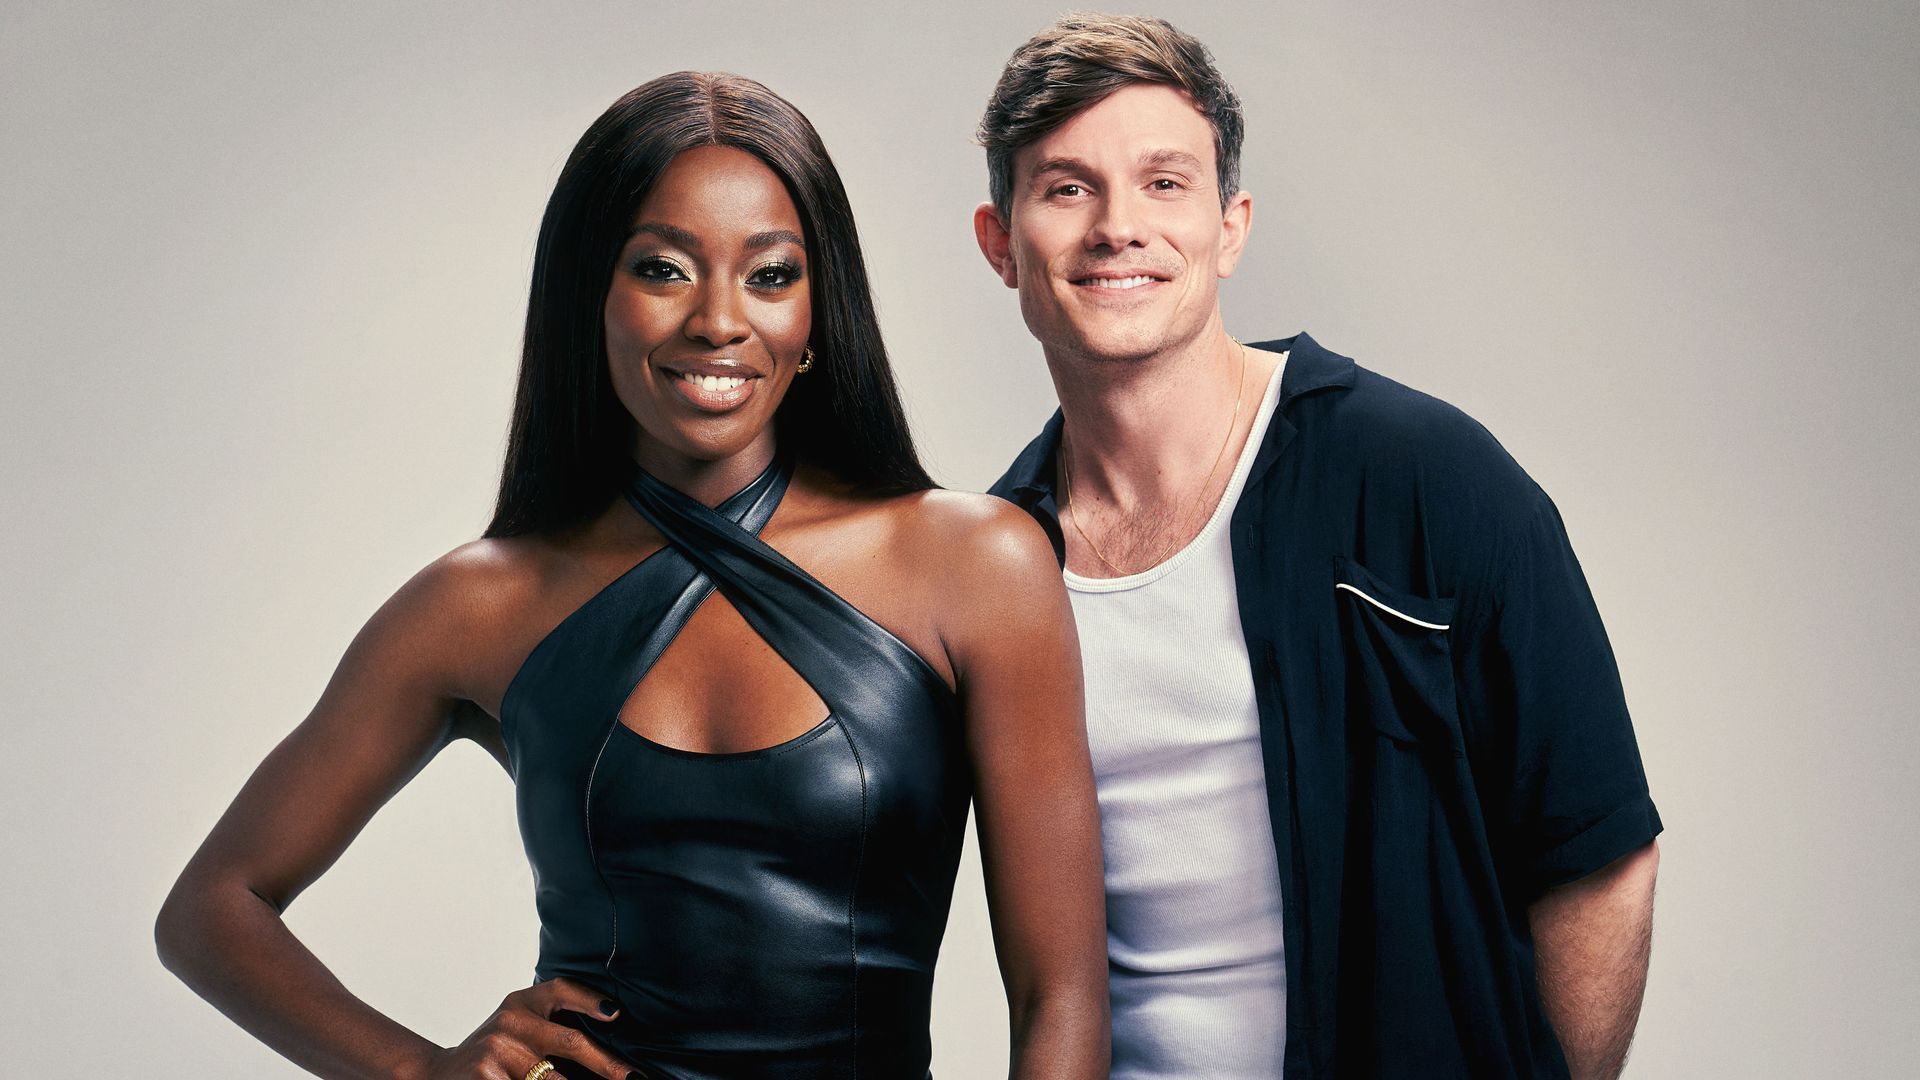 AJ Odudu and Will Best confirmed as Big Brother hosts